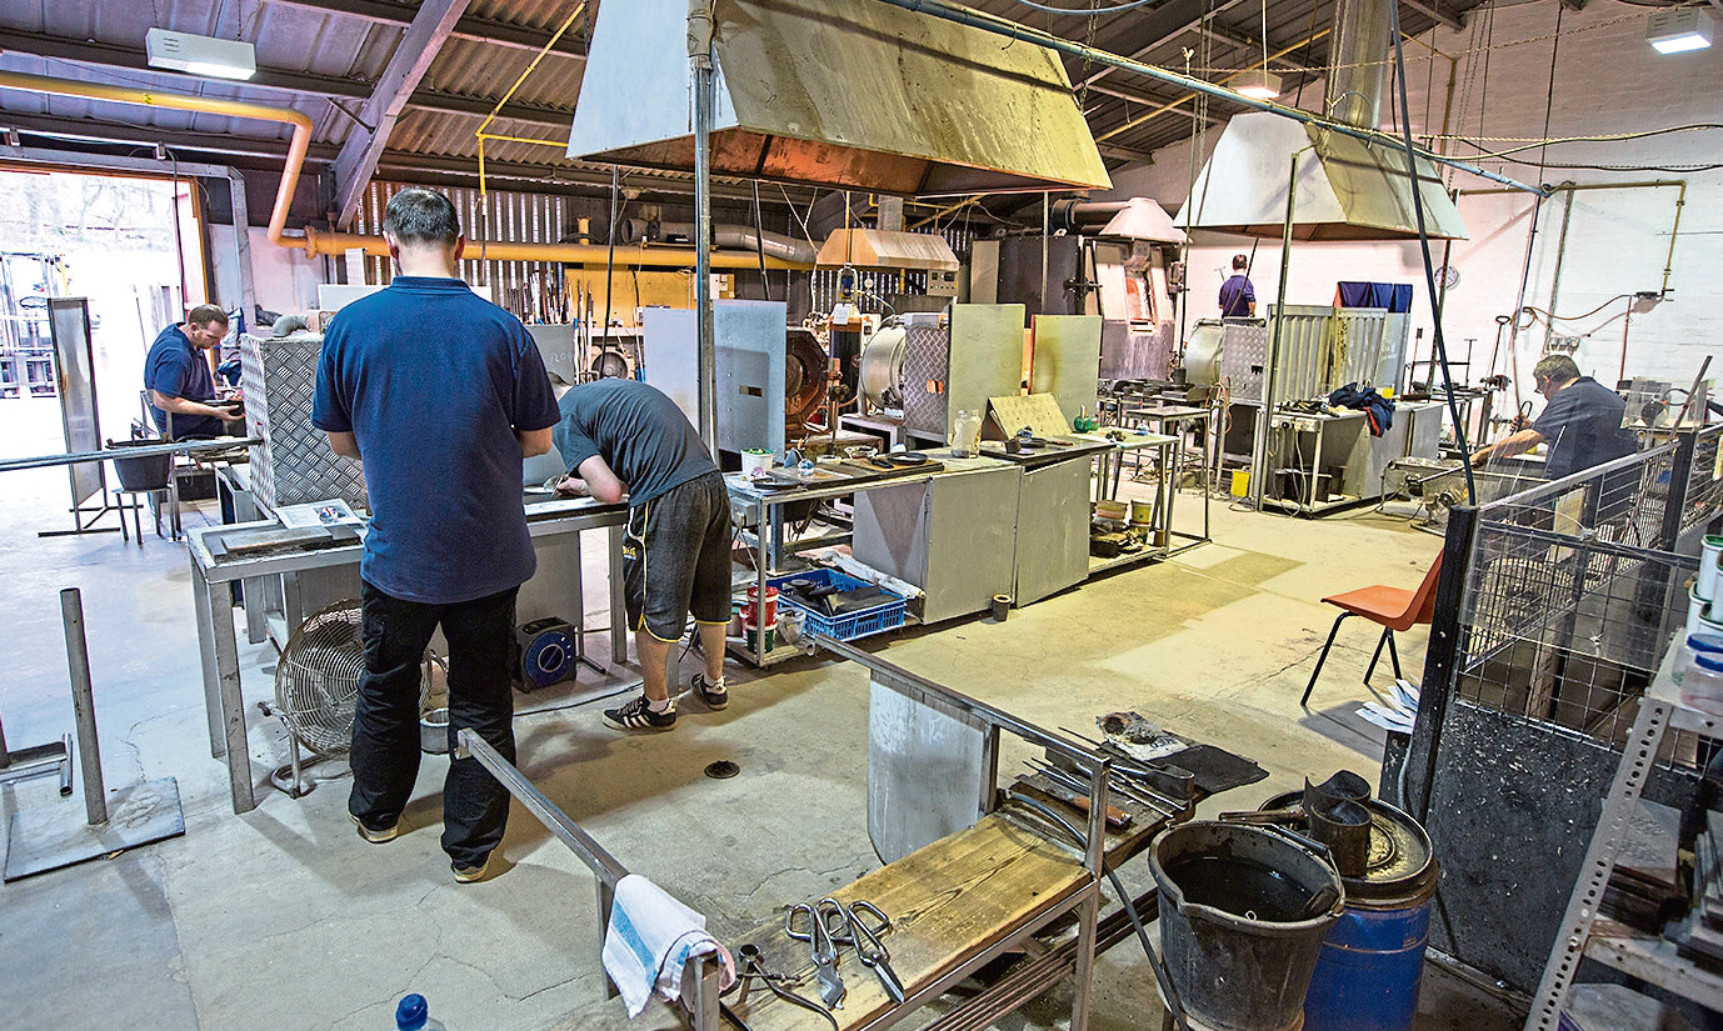 The Caithness Glass production facility at Crieff